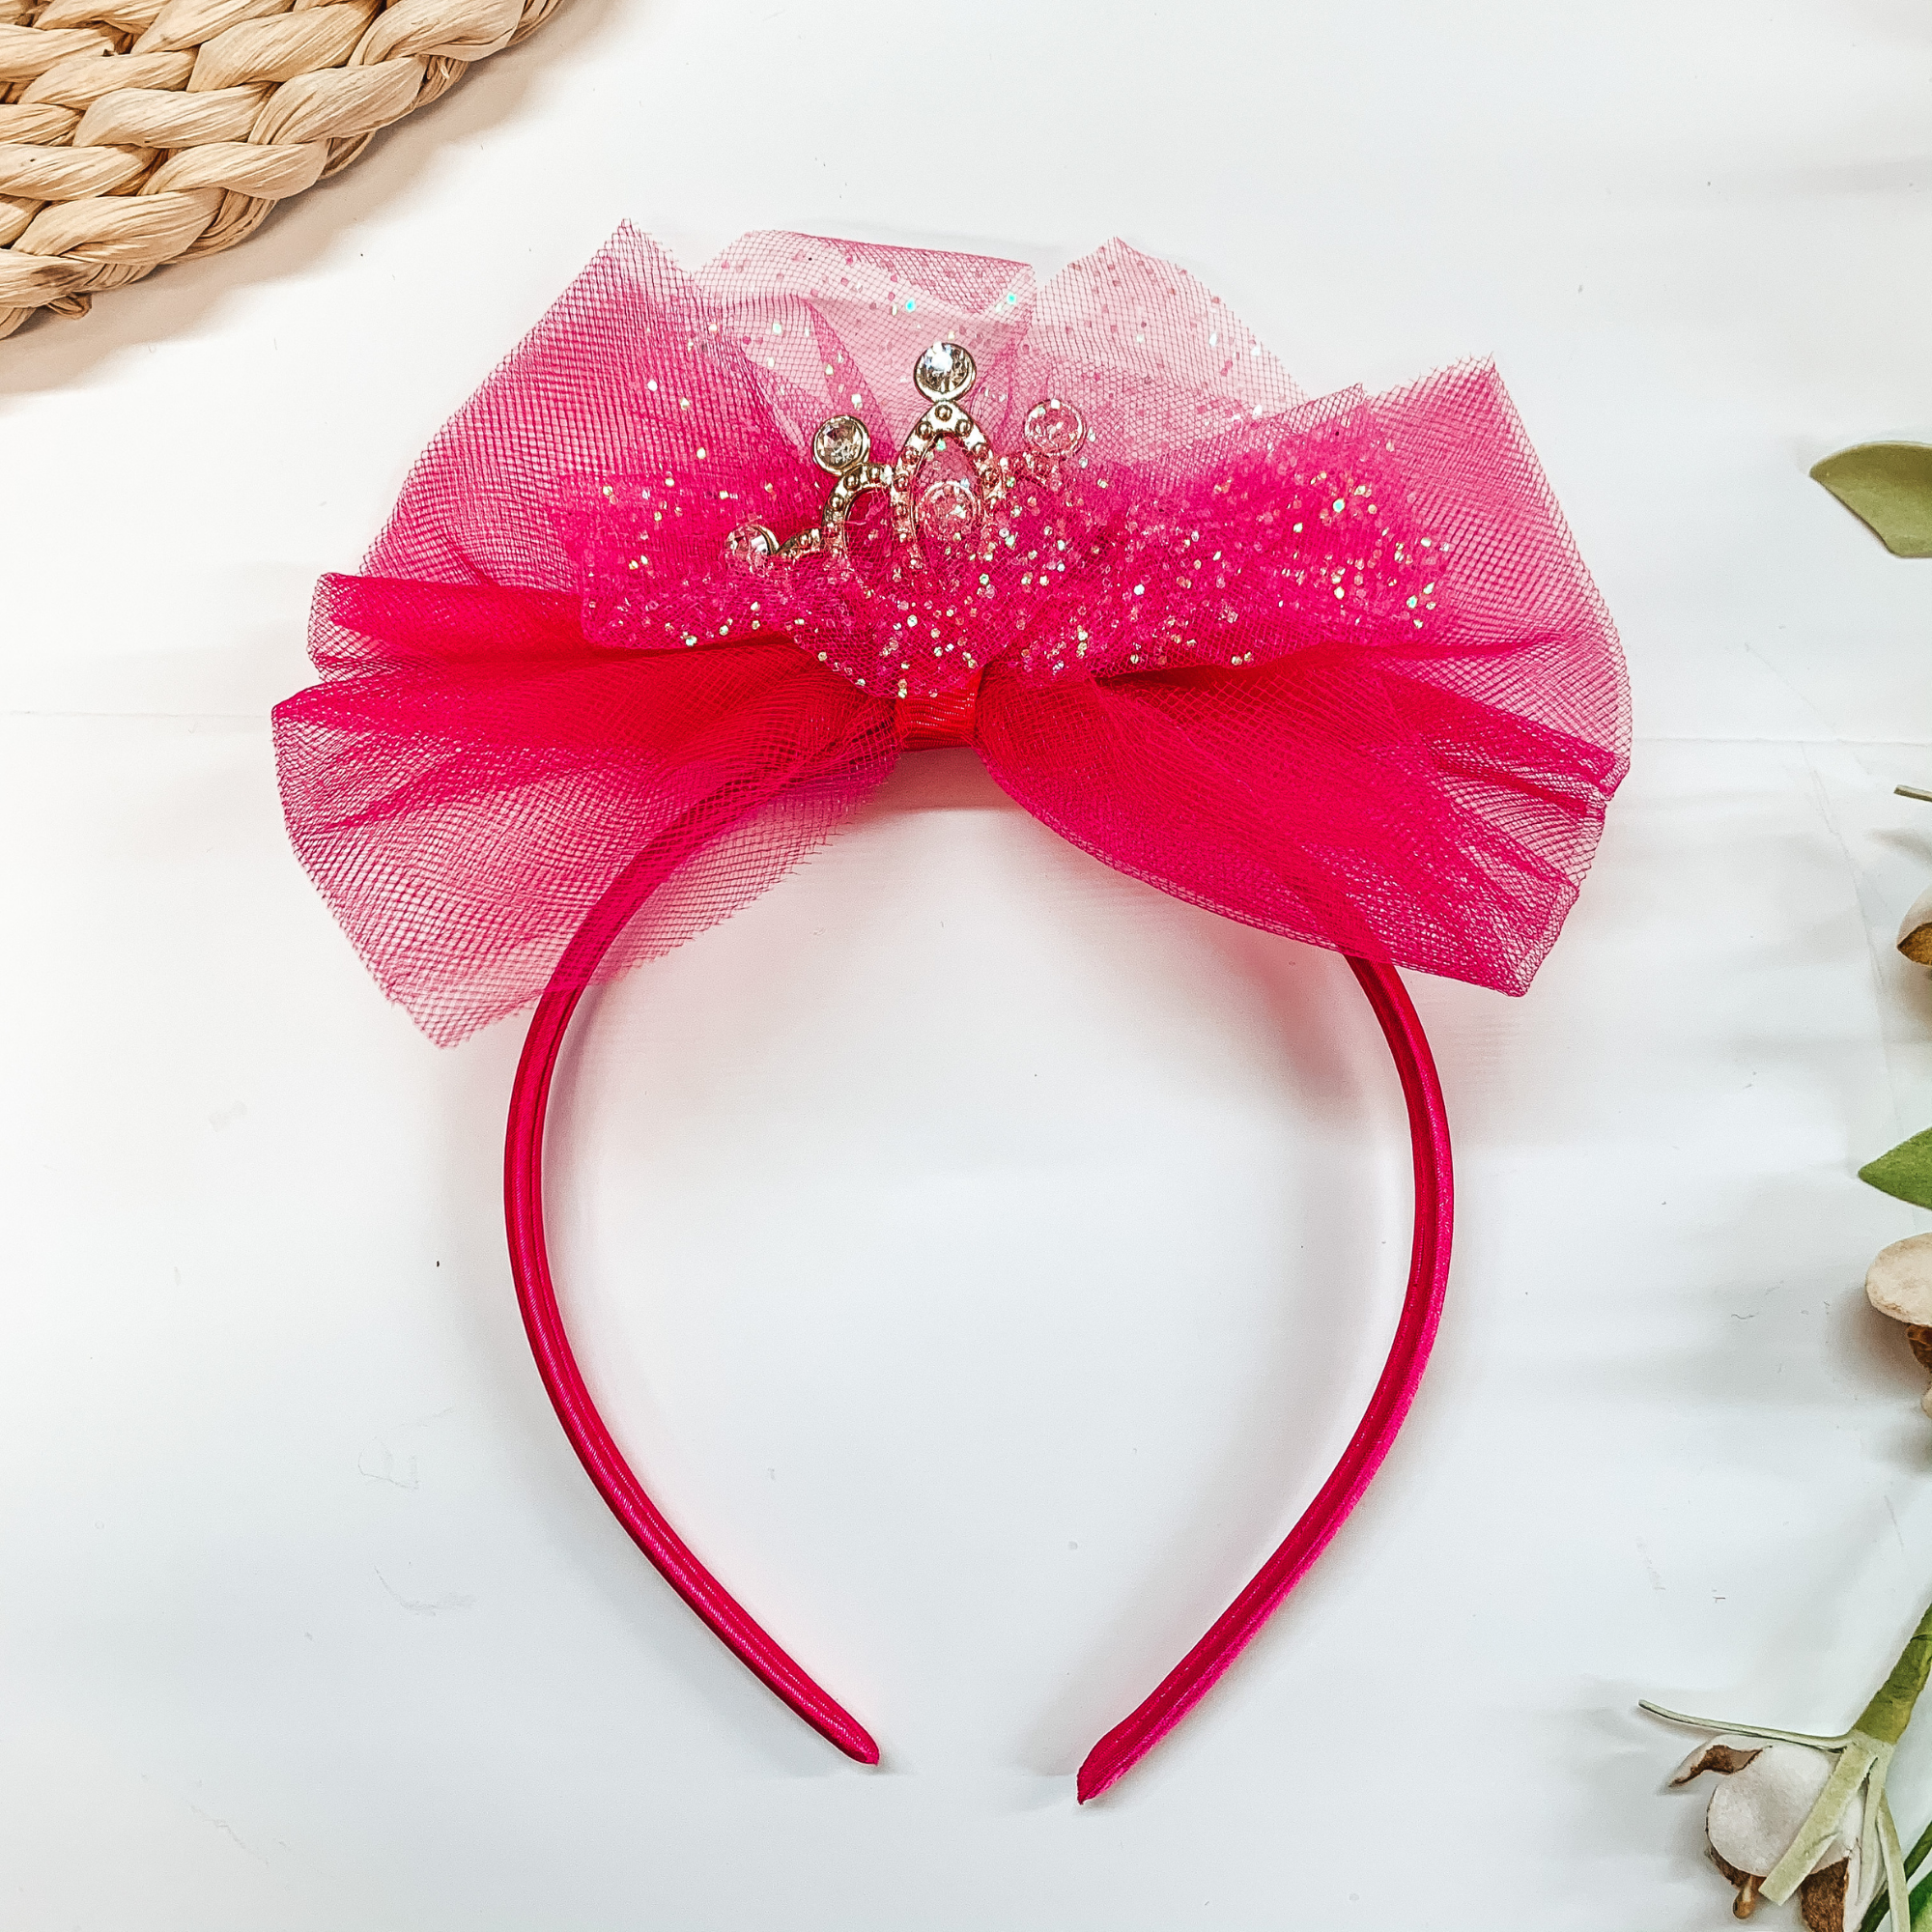 Buy 3 for $10 |  Glitter Headband with Bow and Crown - Giddy Up Glamour Boutique